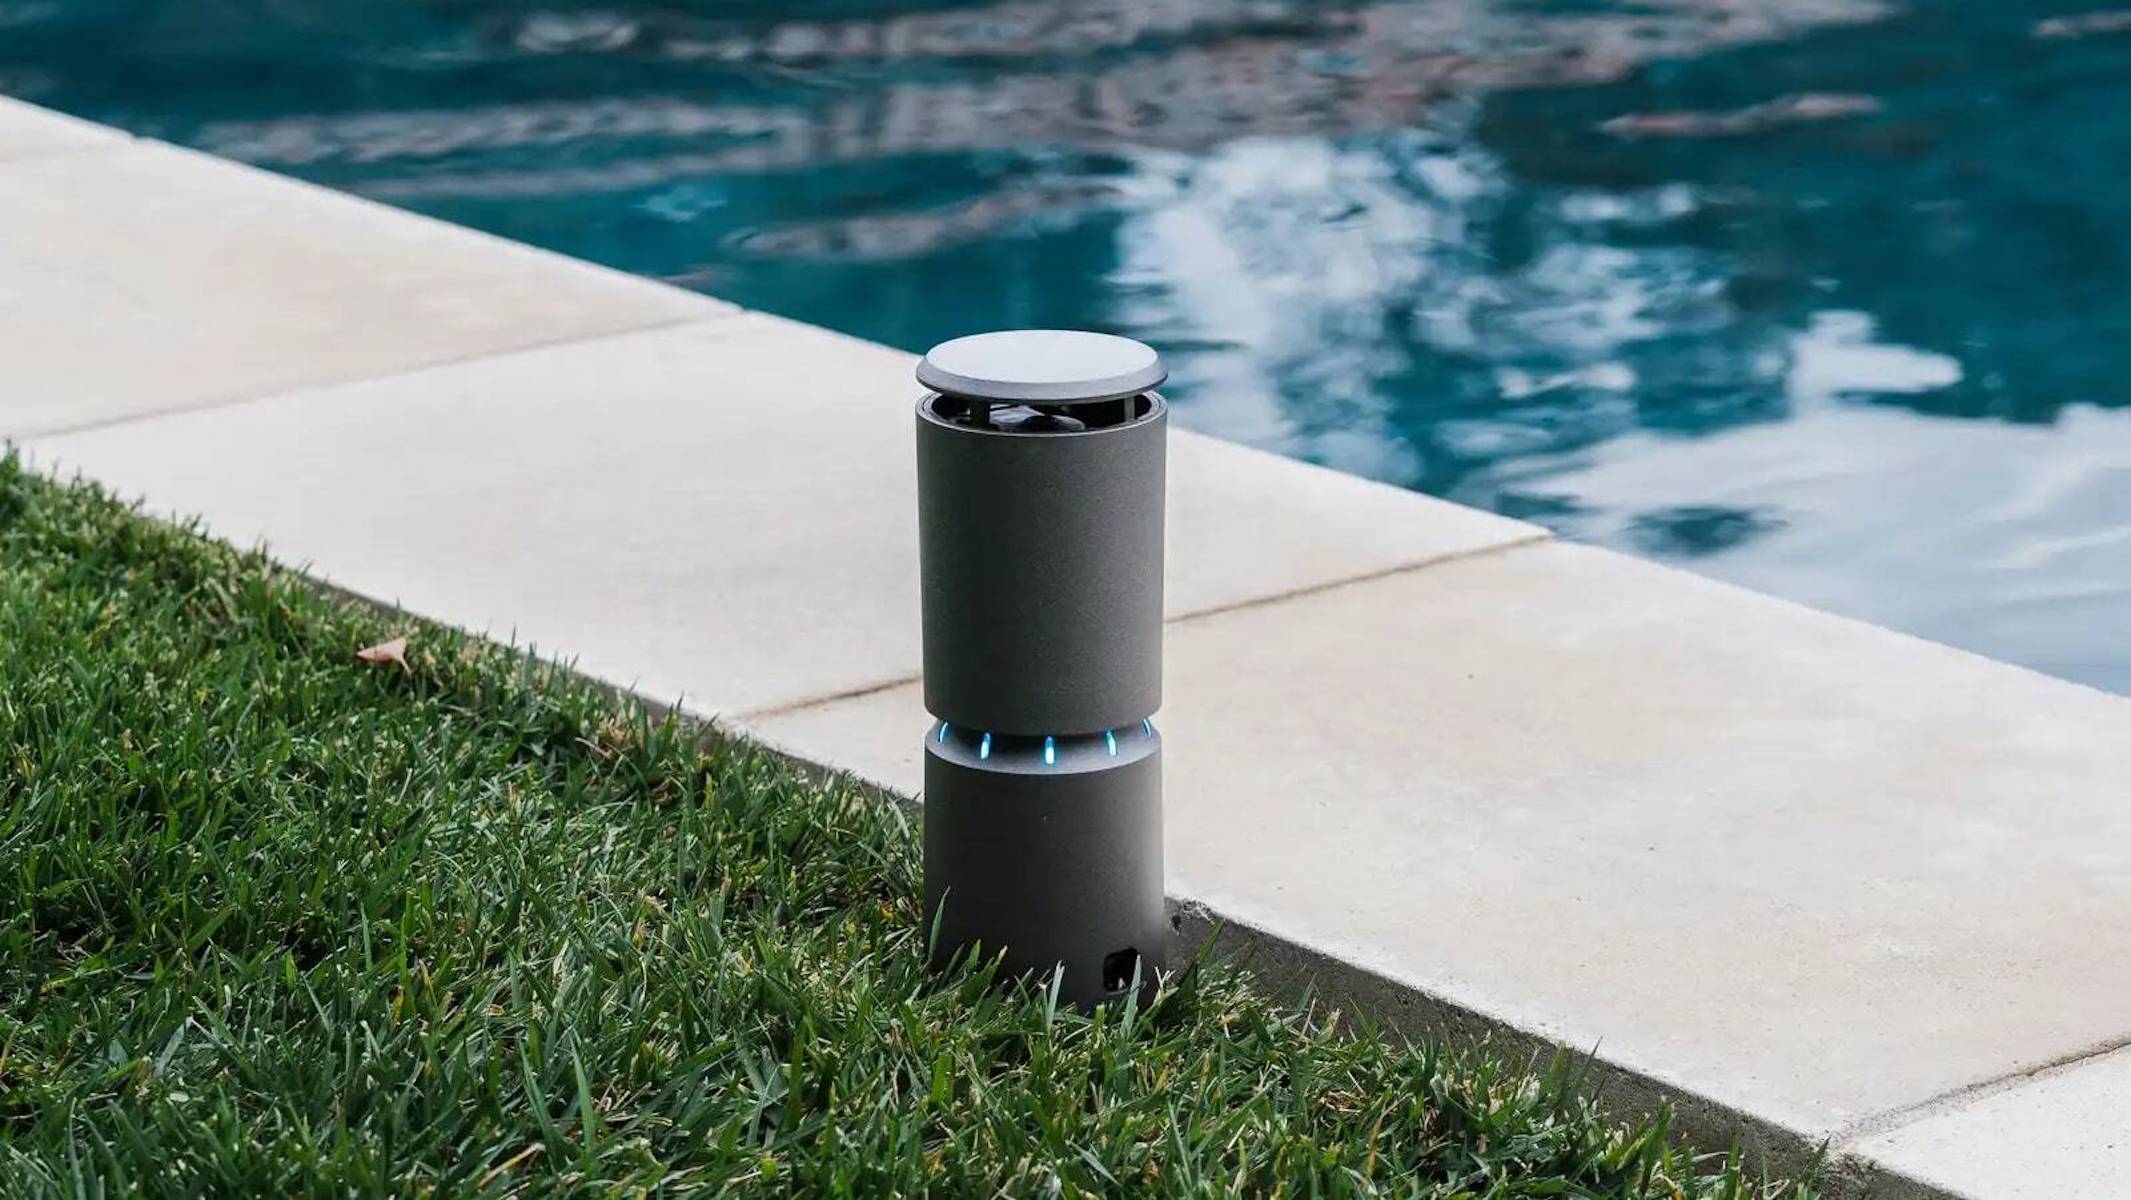 The best garden gadgets to buy for your home in 2022